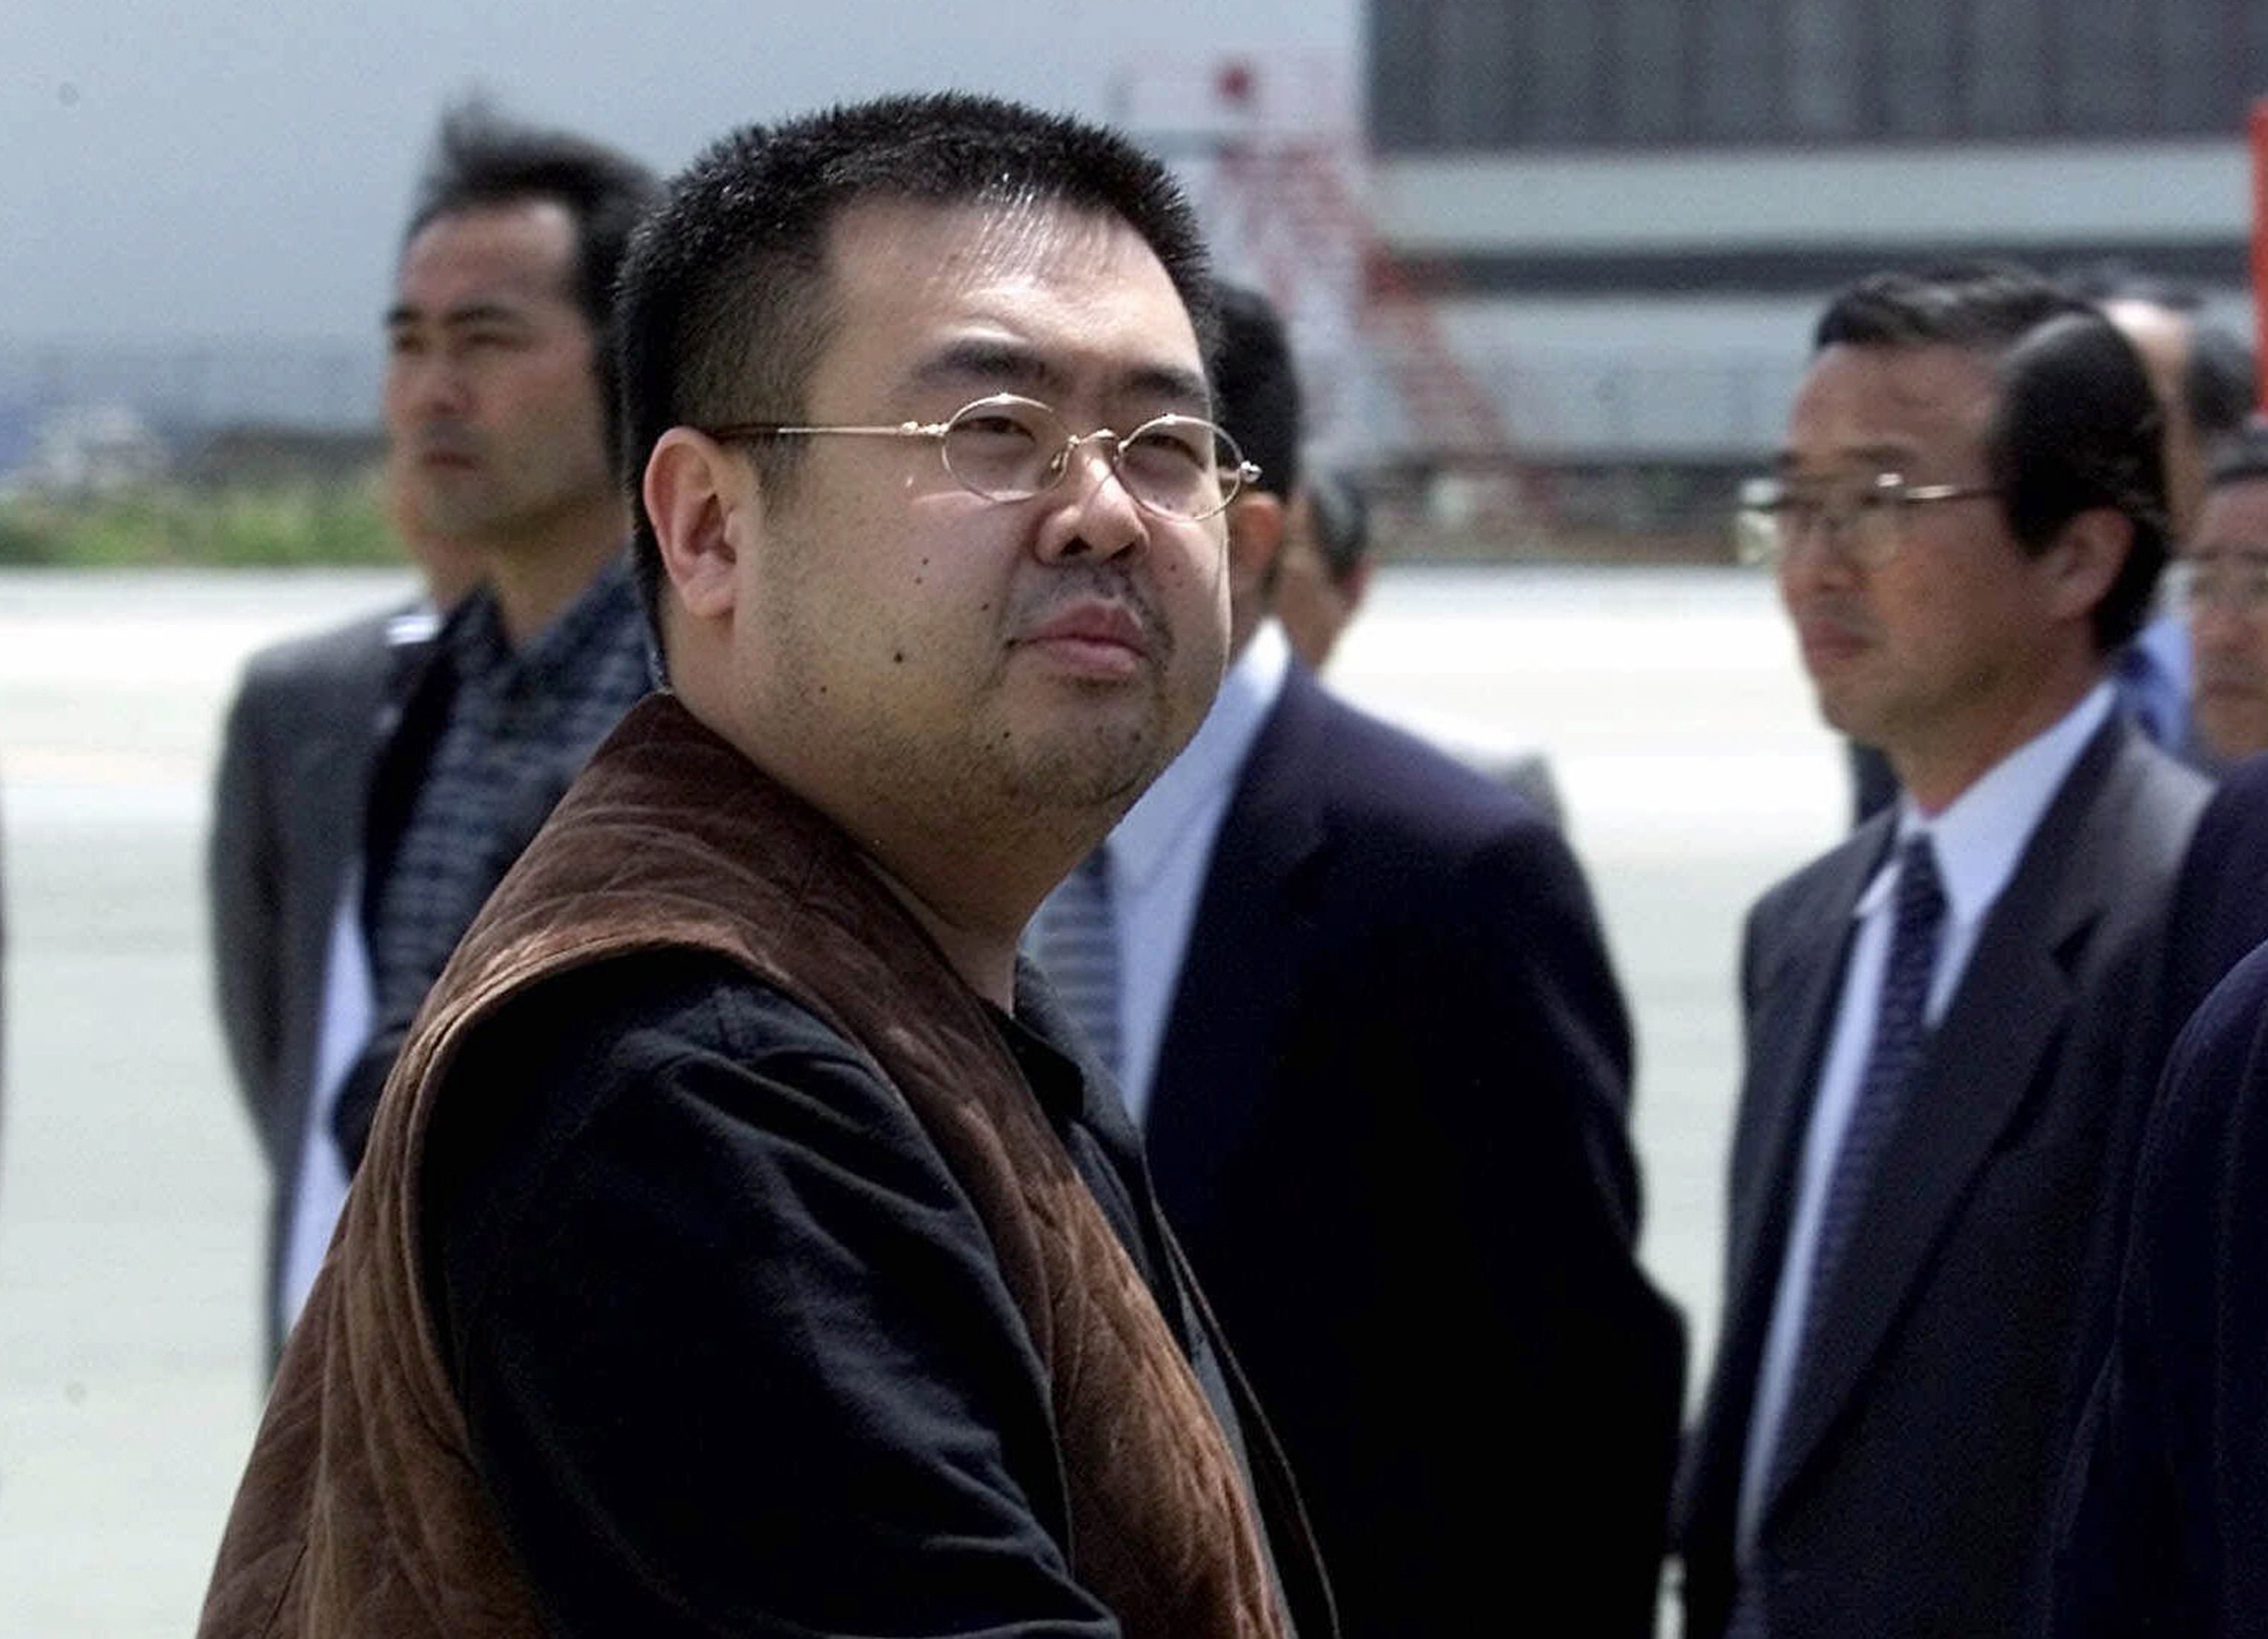 Kim Jong-nam, the eldest son of North Korean leader Kim Jong Il, was fatally poisoned at Kuala Lumpur's airport in February 2017. Photo: AP